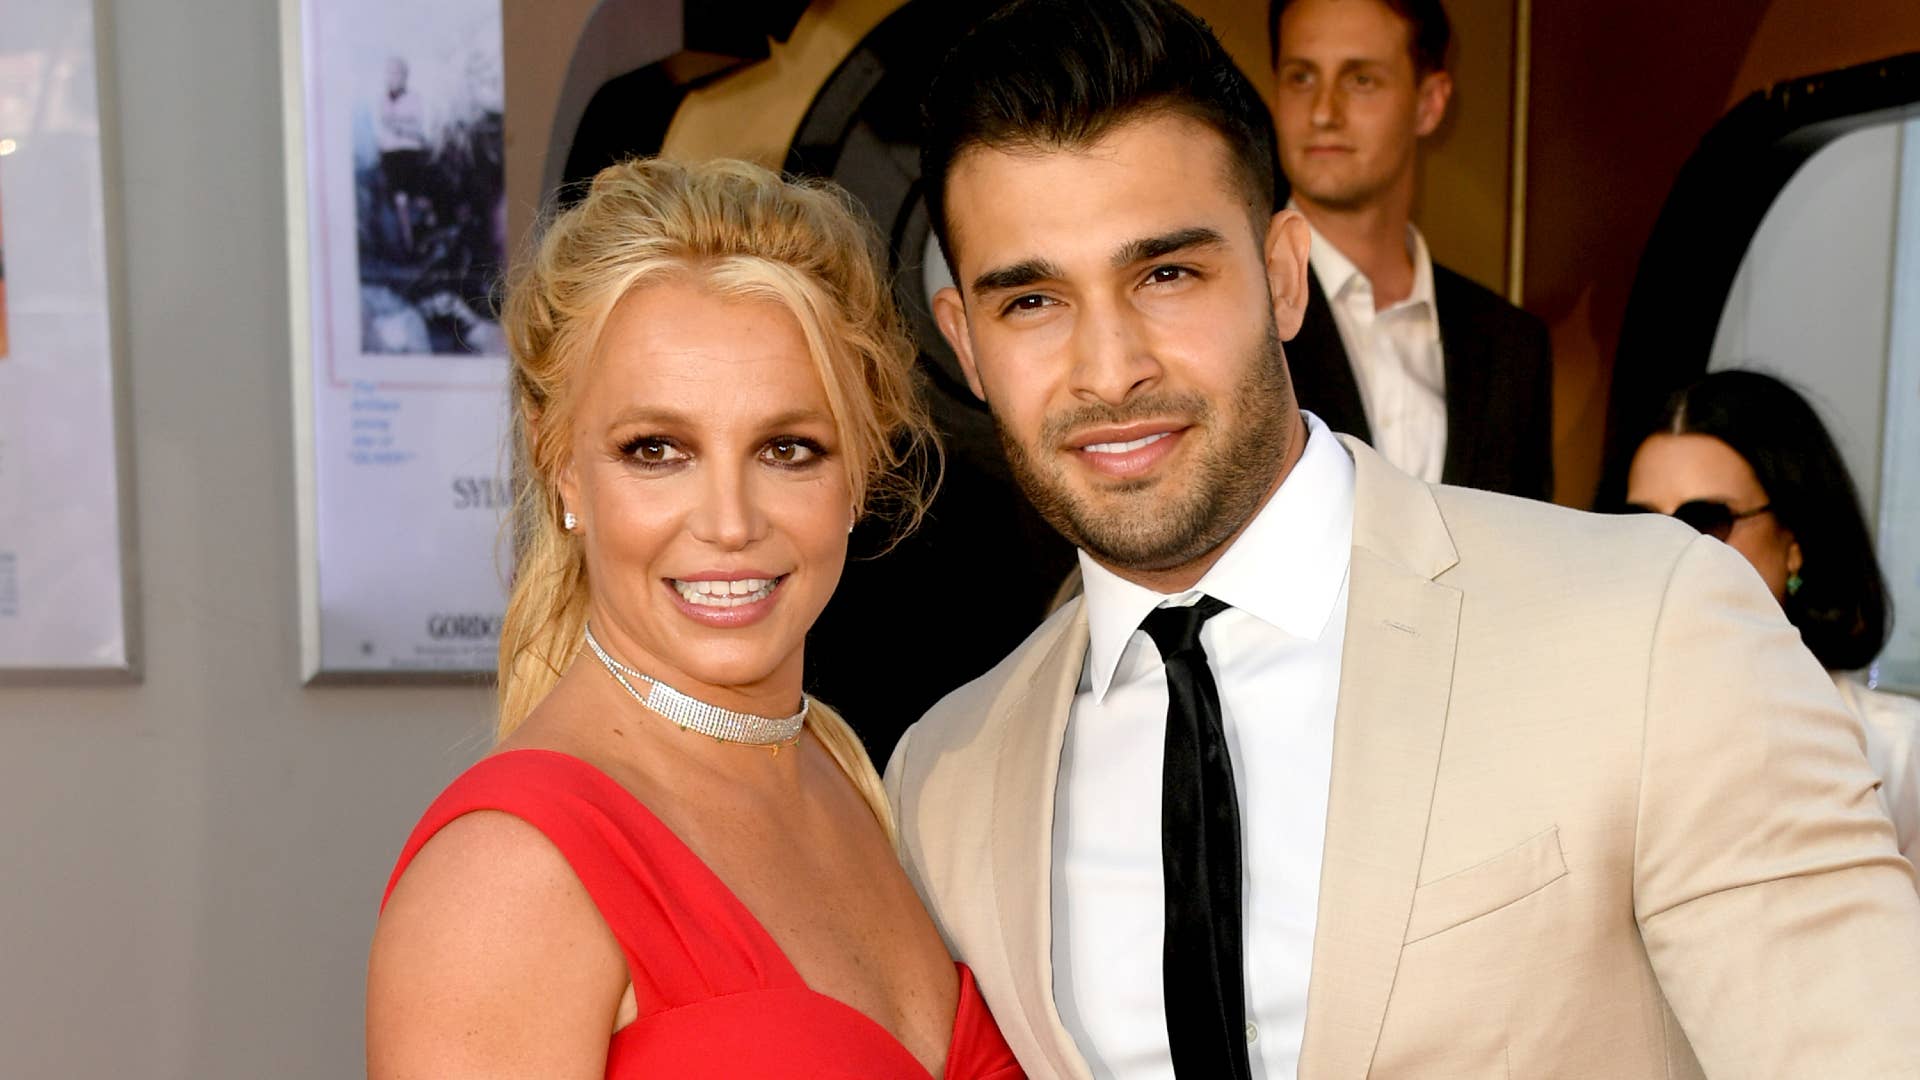 Britney Spears and Sam Asghari are pictured at a premiere